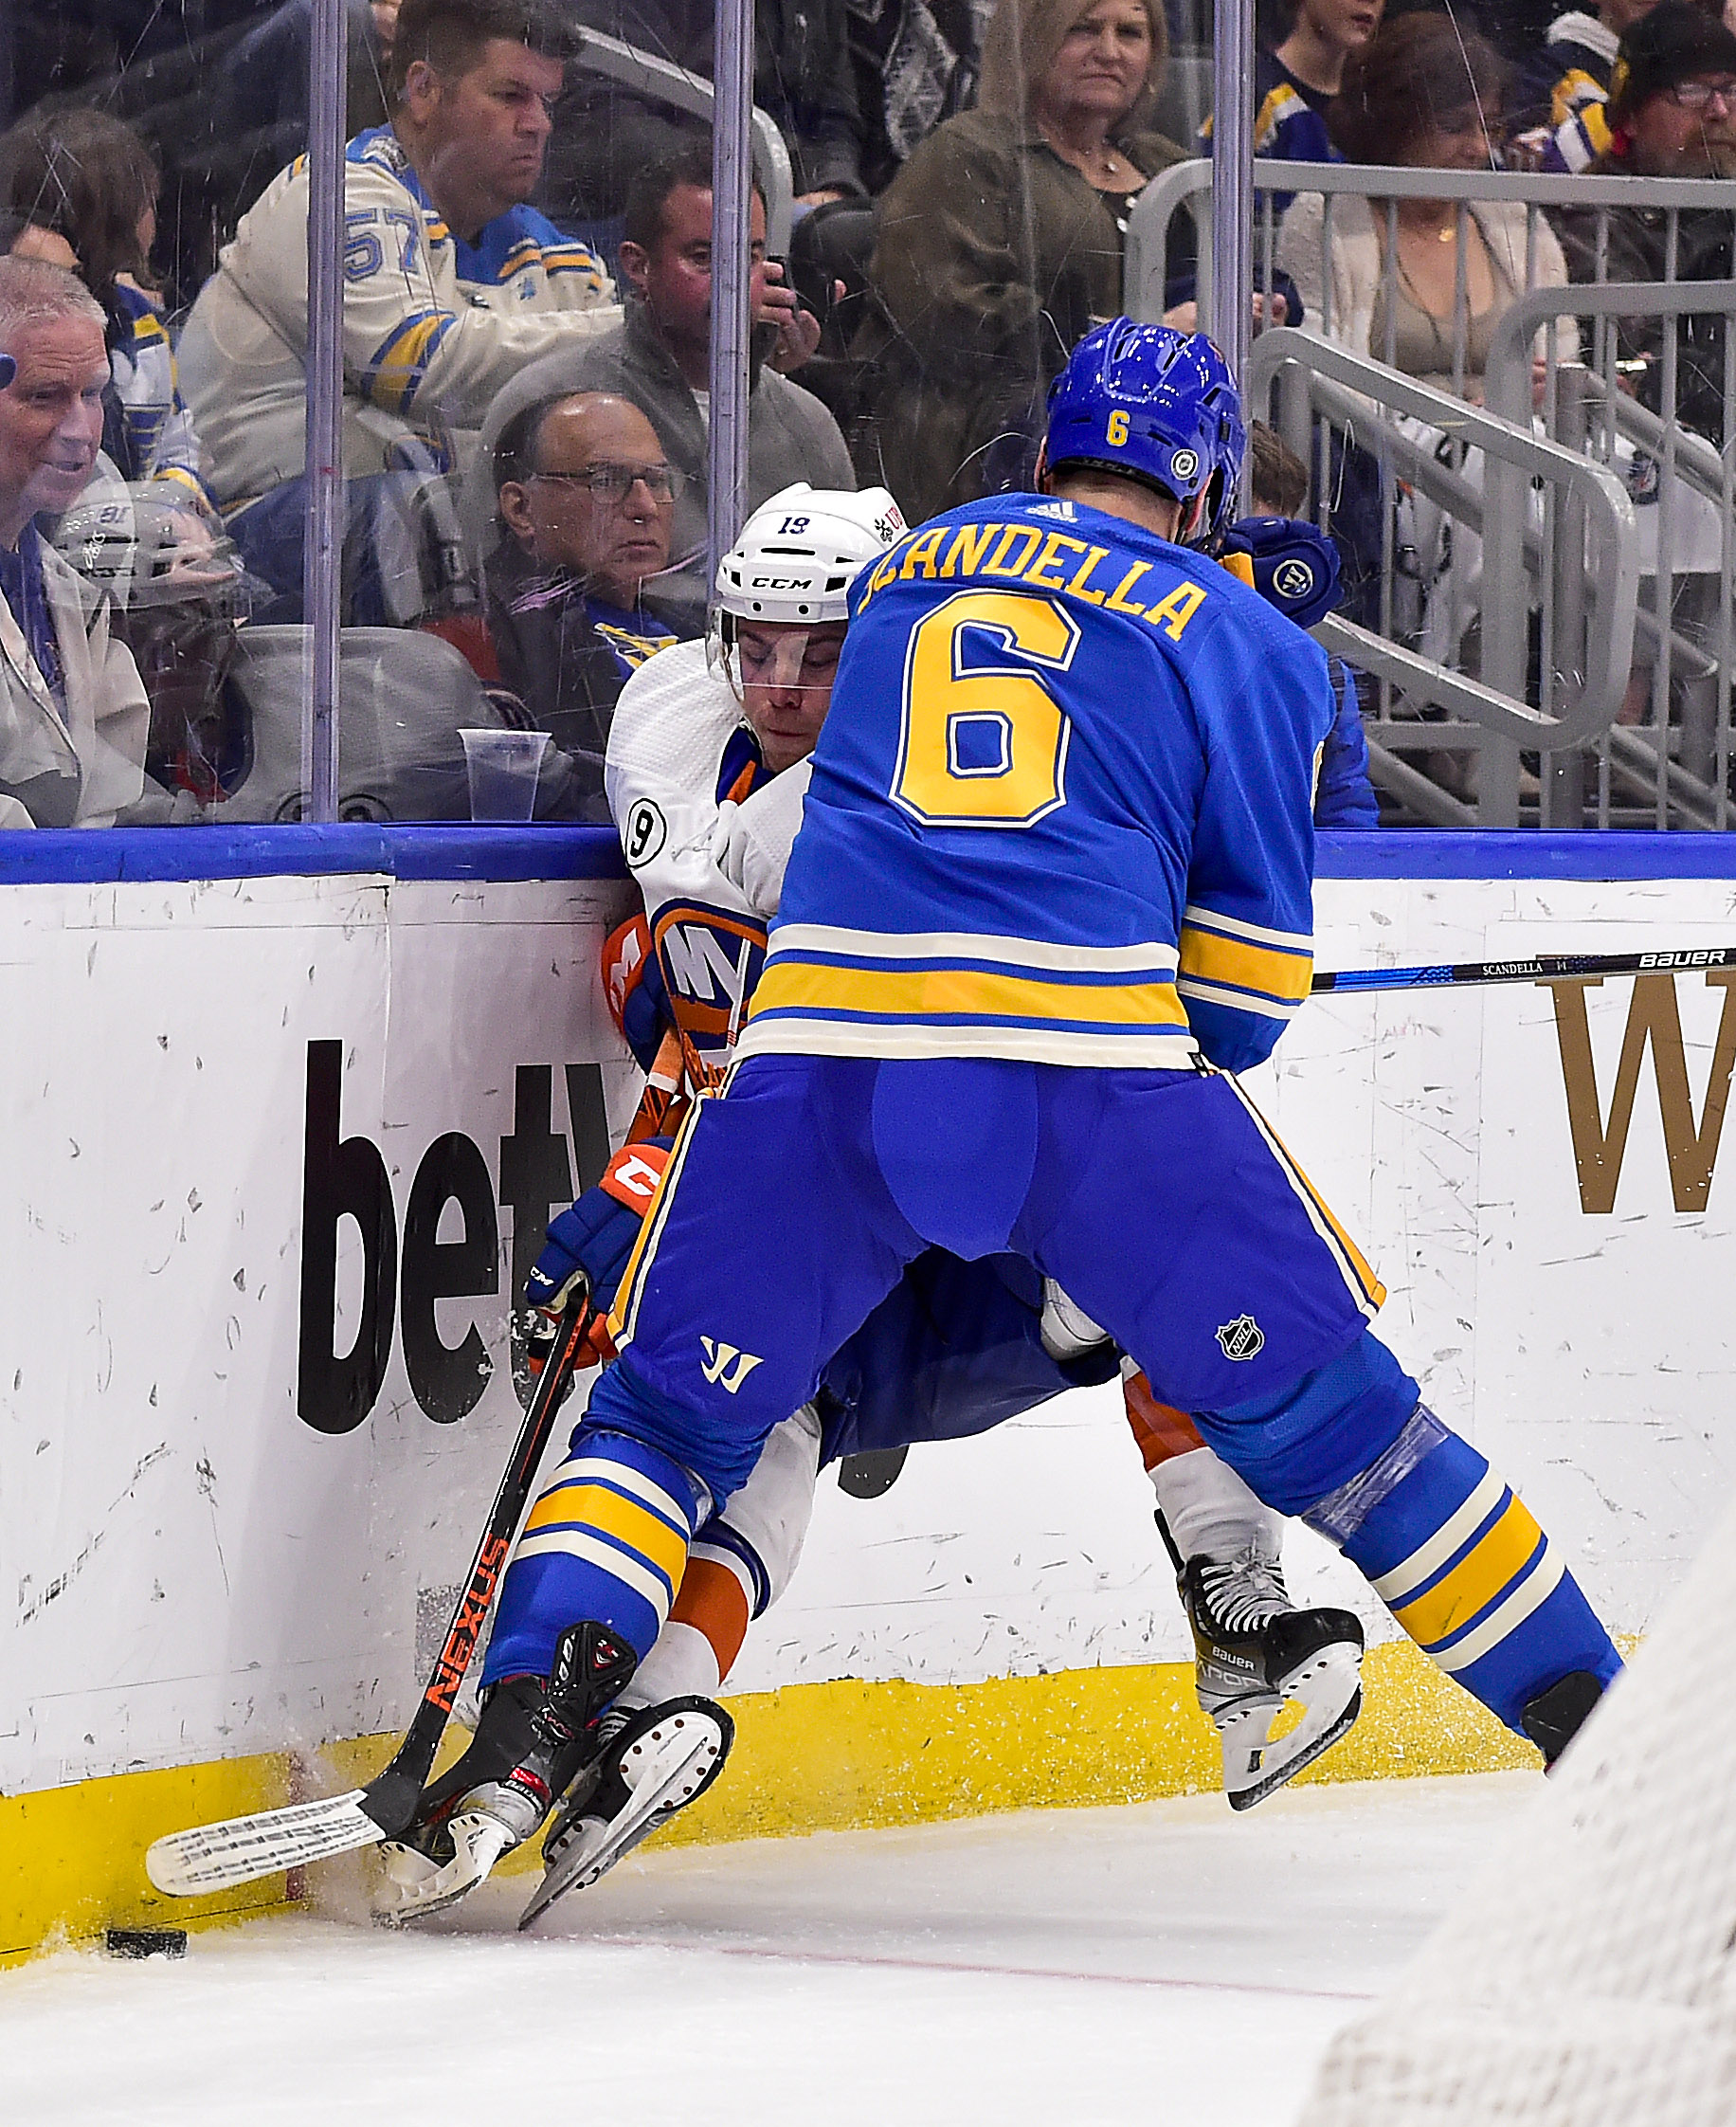 Berube: Blues 'ready to go' after lengthy offseason